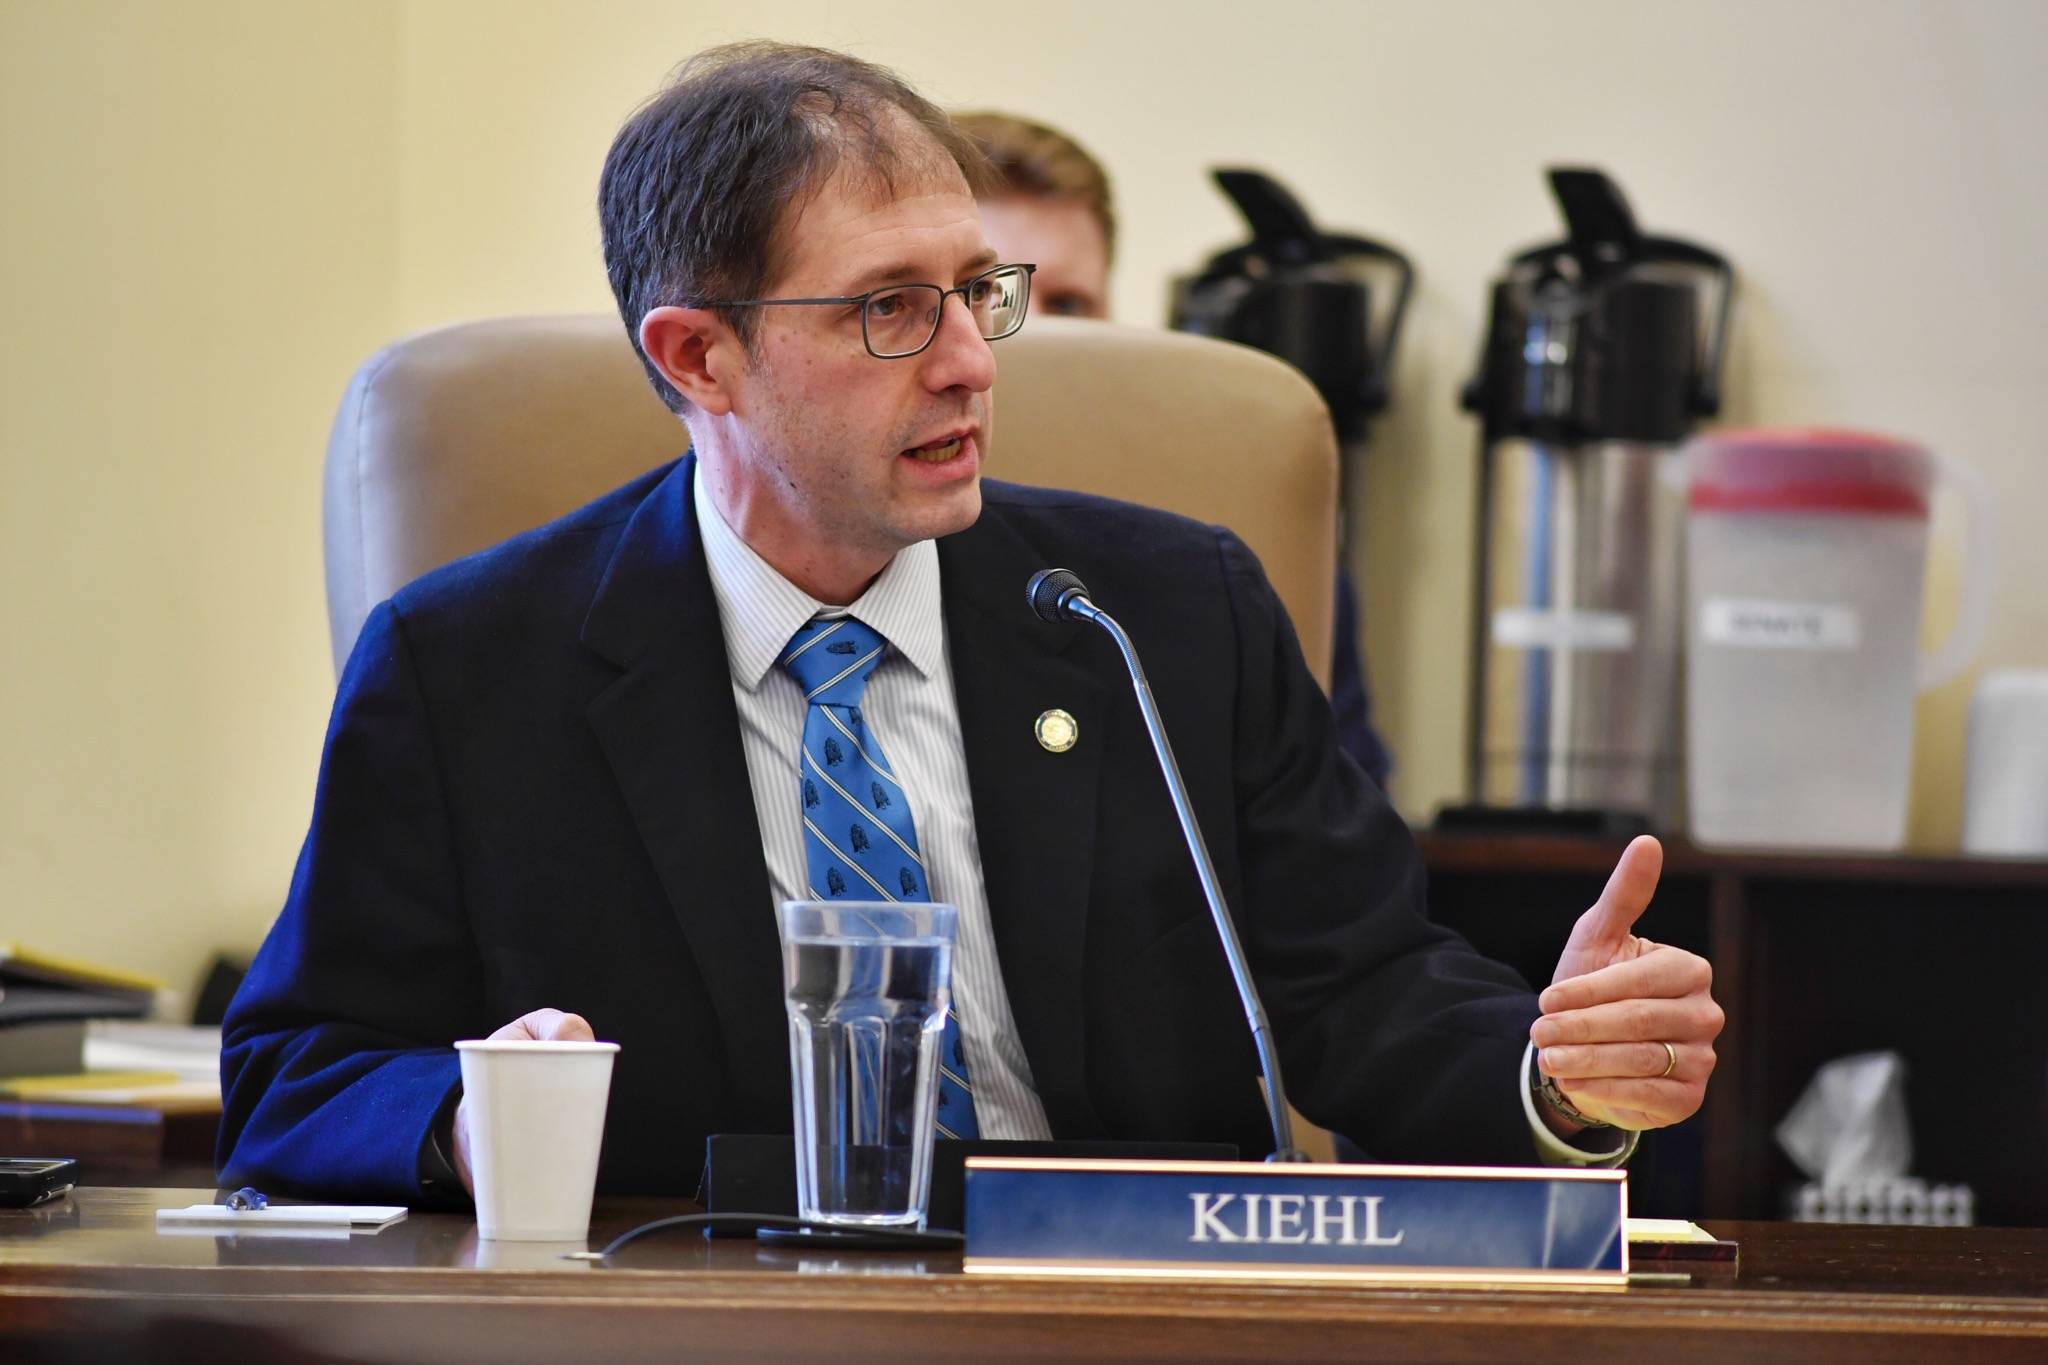 Sen. Jesse Kiehl, D-Juneau, introduces an amendment to SB 12, a crime bill, during a Senate Judiciary Committee meeting at the Capitol on Monday, March 4, 2019. (Michael Penn | Juneau Empire)